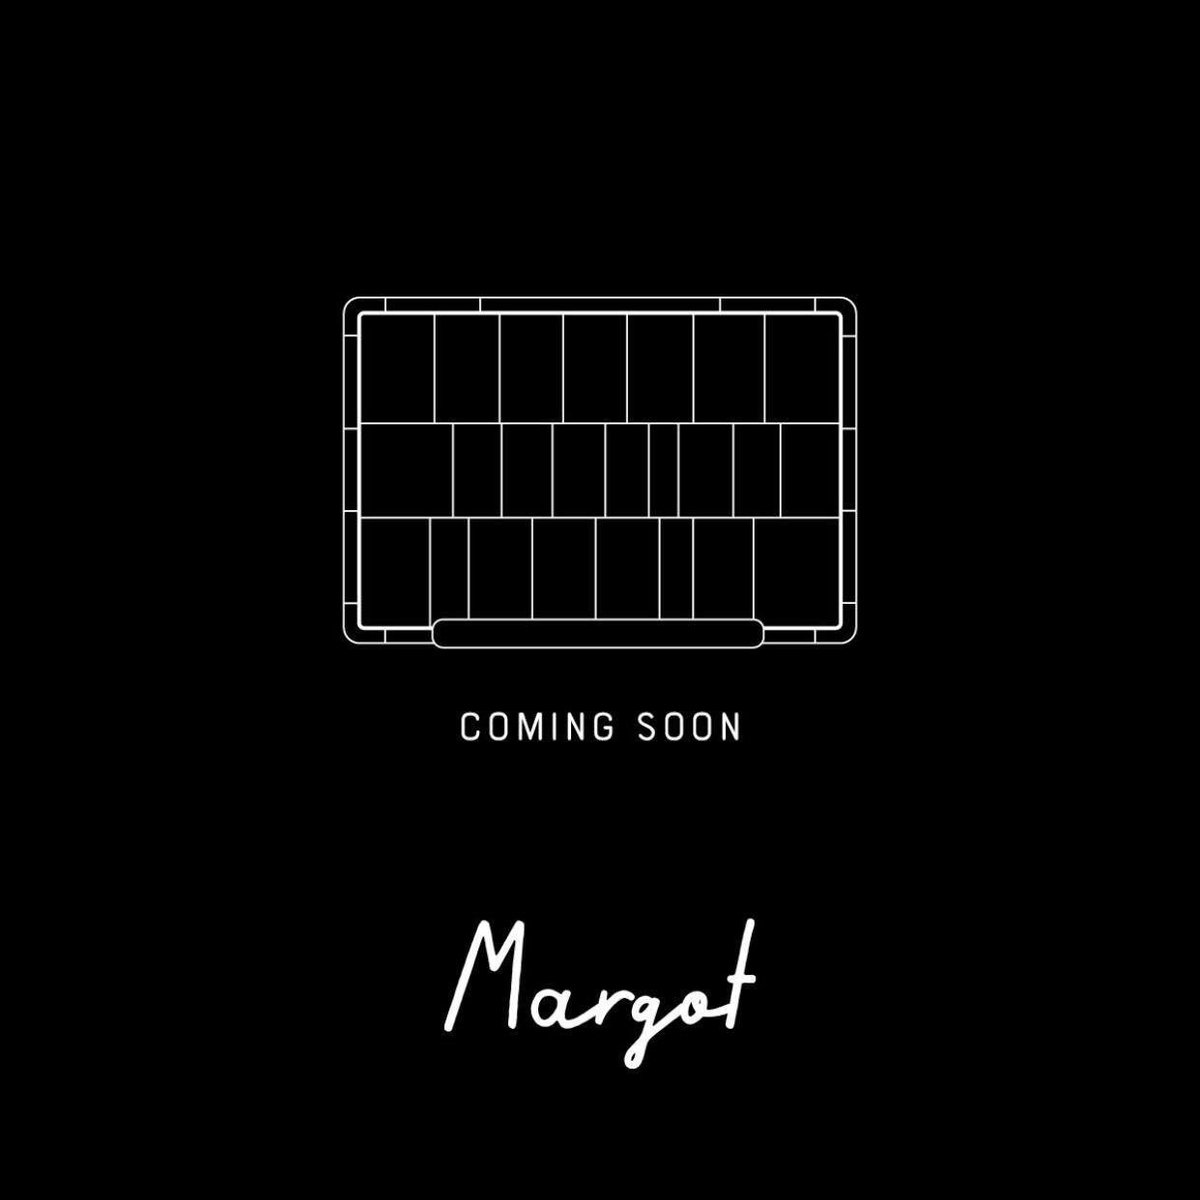 When Margot met ... 

Keep an eye out for more tasty details, coming soon 🔥🍕🖤

13.02.20

#OurFirstDate #MargotBelfast #ComingSoon #BelfastBars